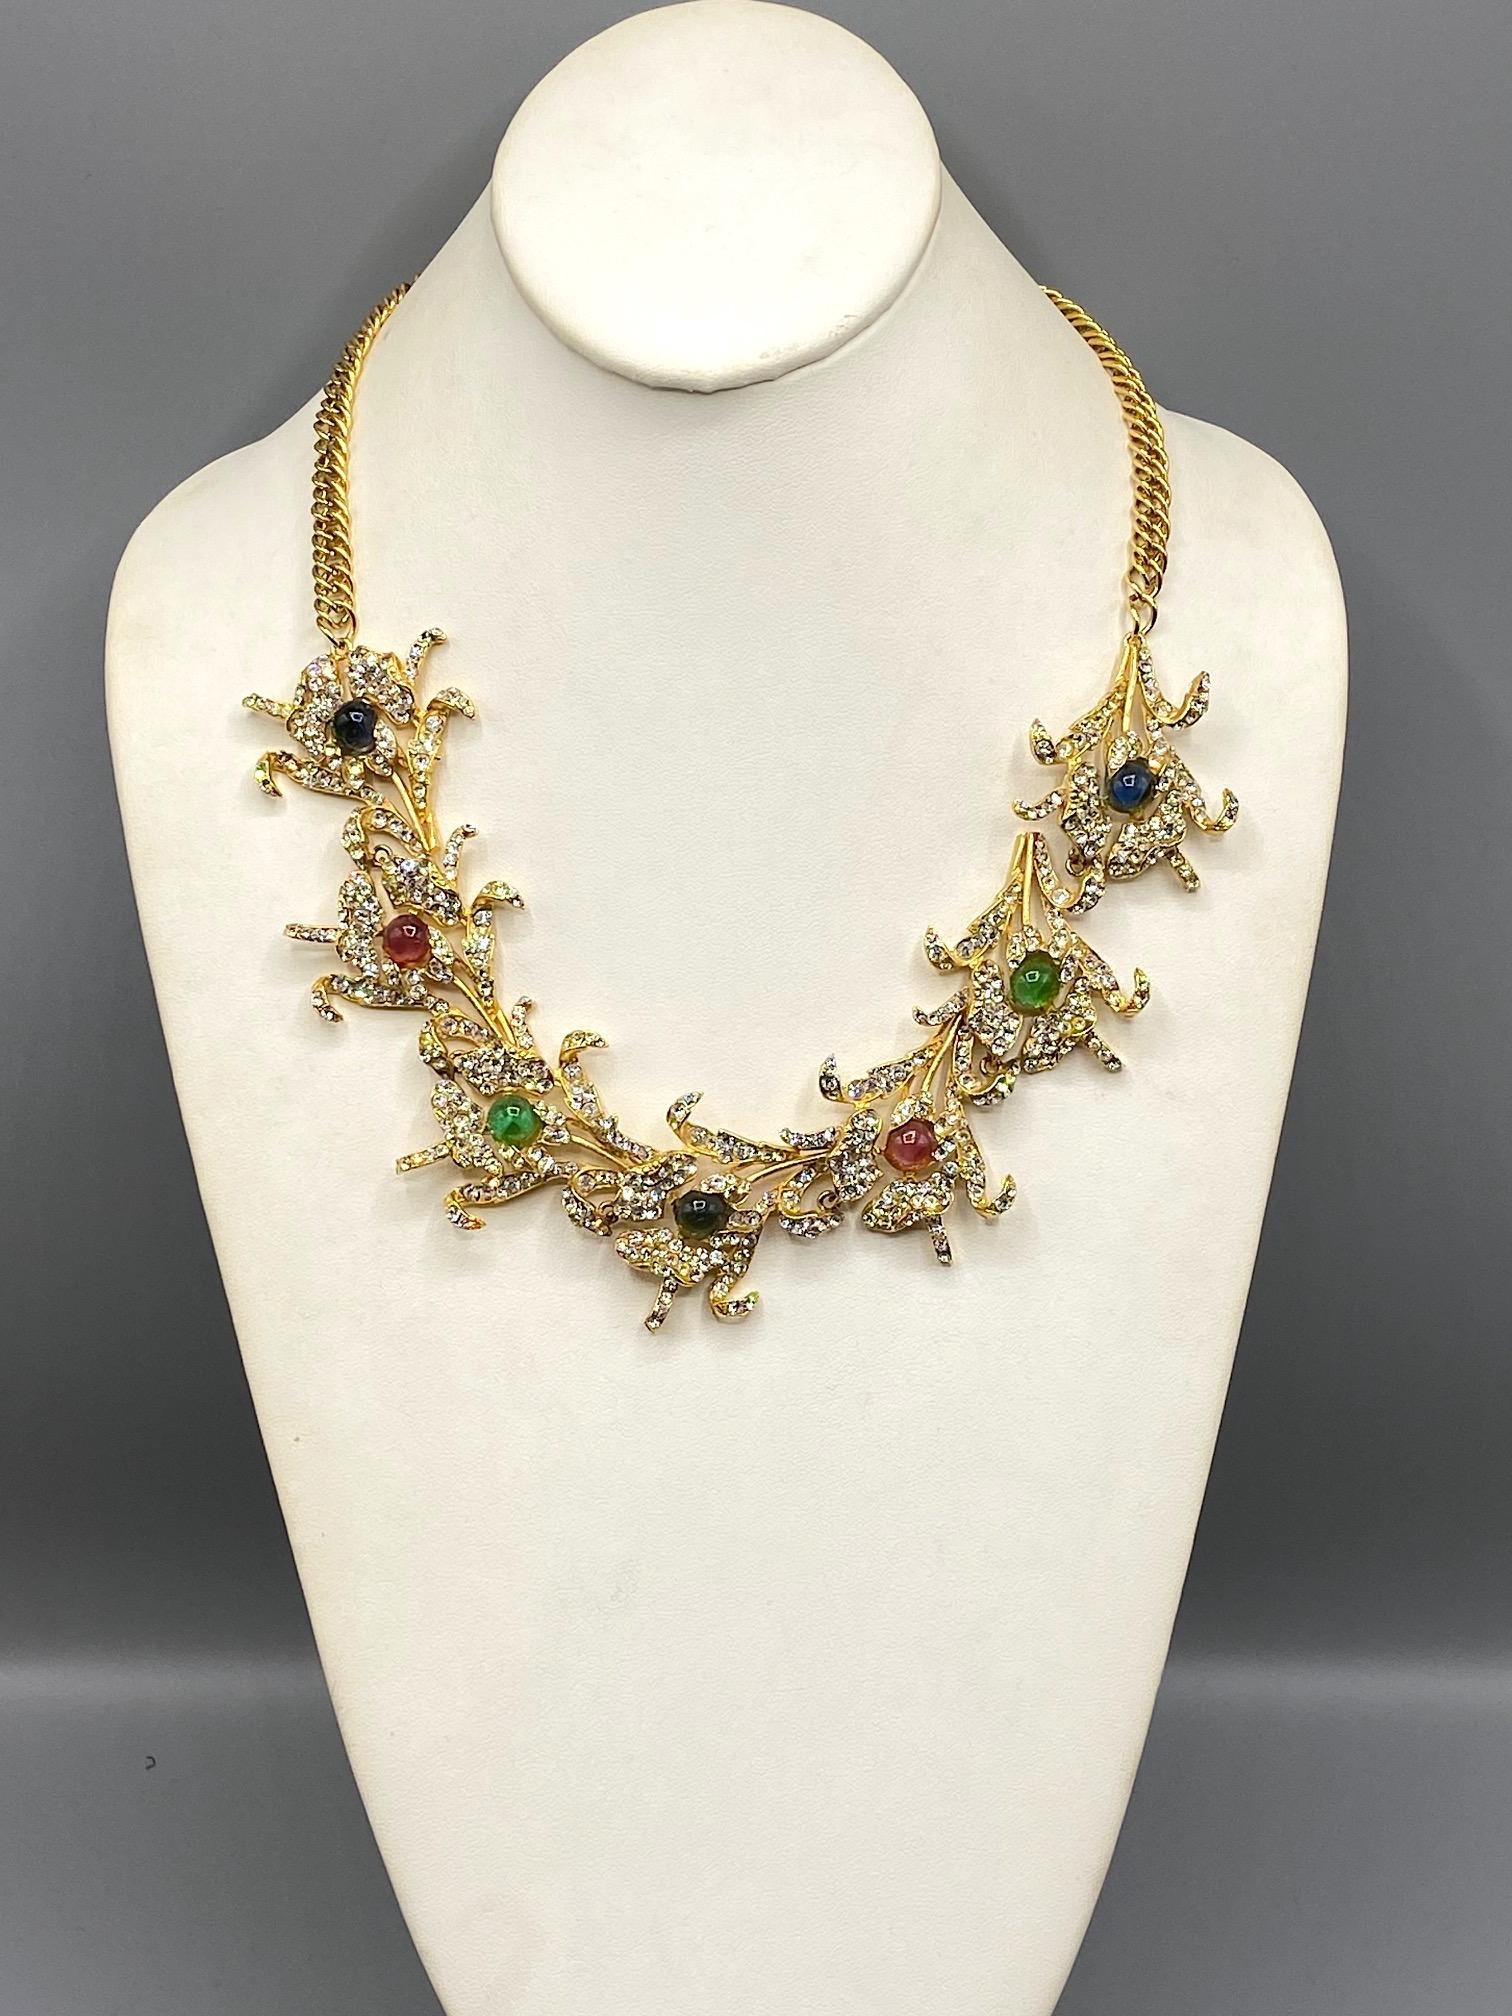 Presented is an eye catching creation by Carlo Zini of Milan, Italy. The design is a lovely composition of seven pansy flowers linked together and suspended from a chain. Each flower features a central glass cabochon in red, blue or green. The glass